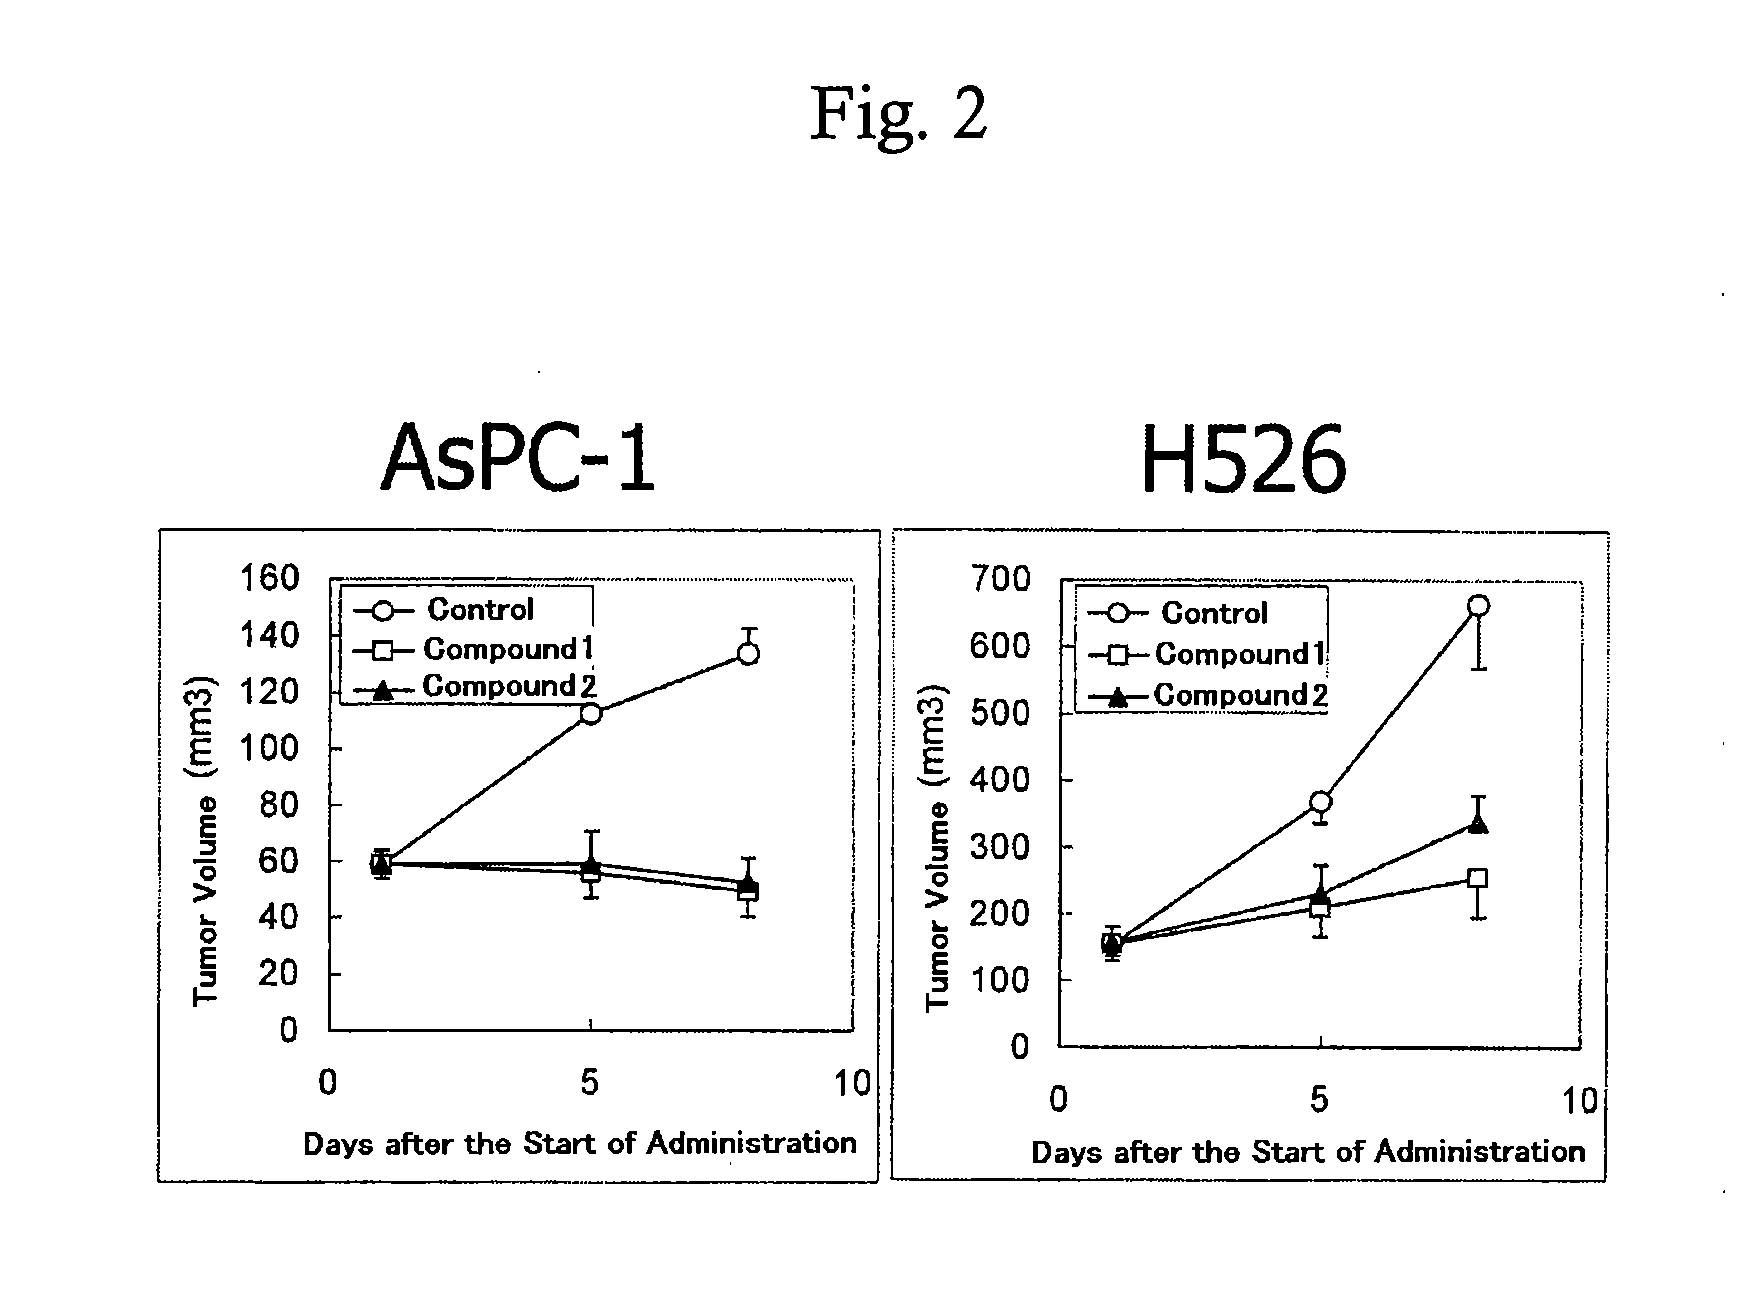 Method for prediction of the efficacy of vascularization inhibitor